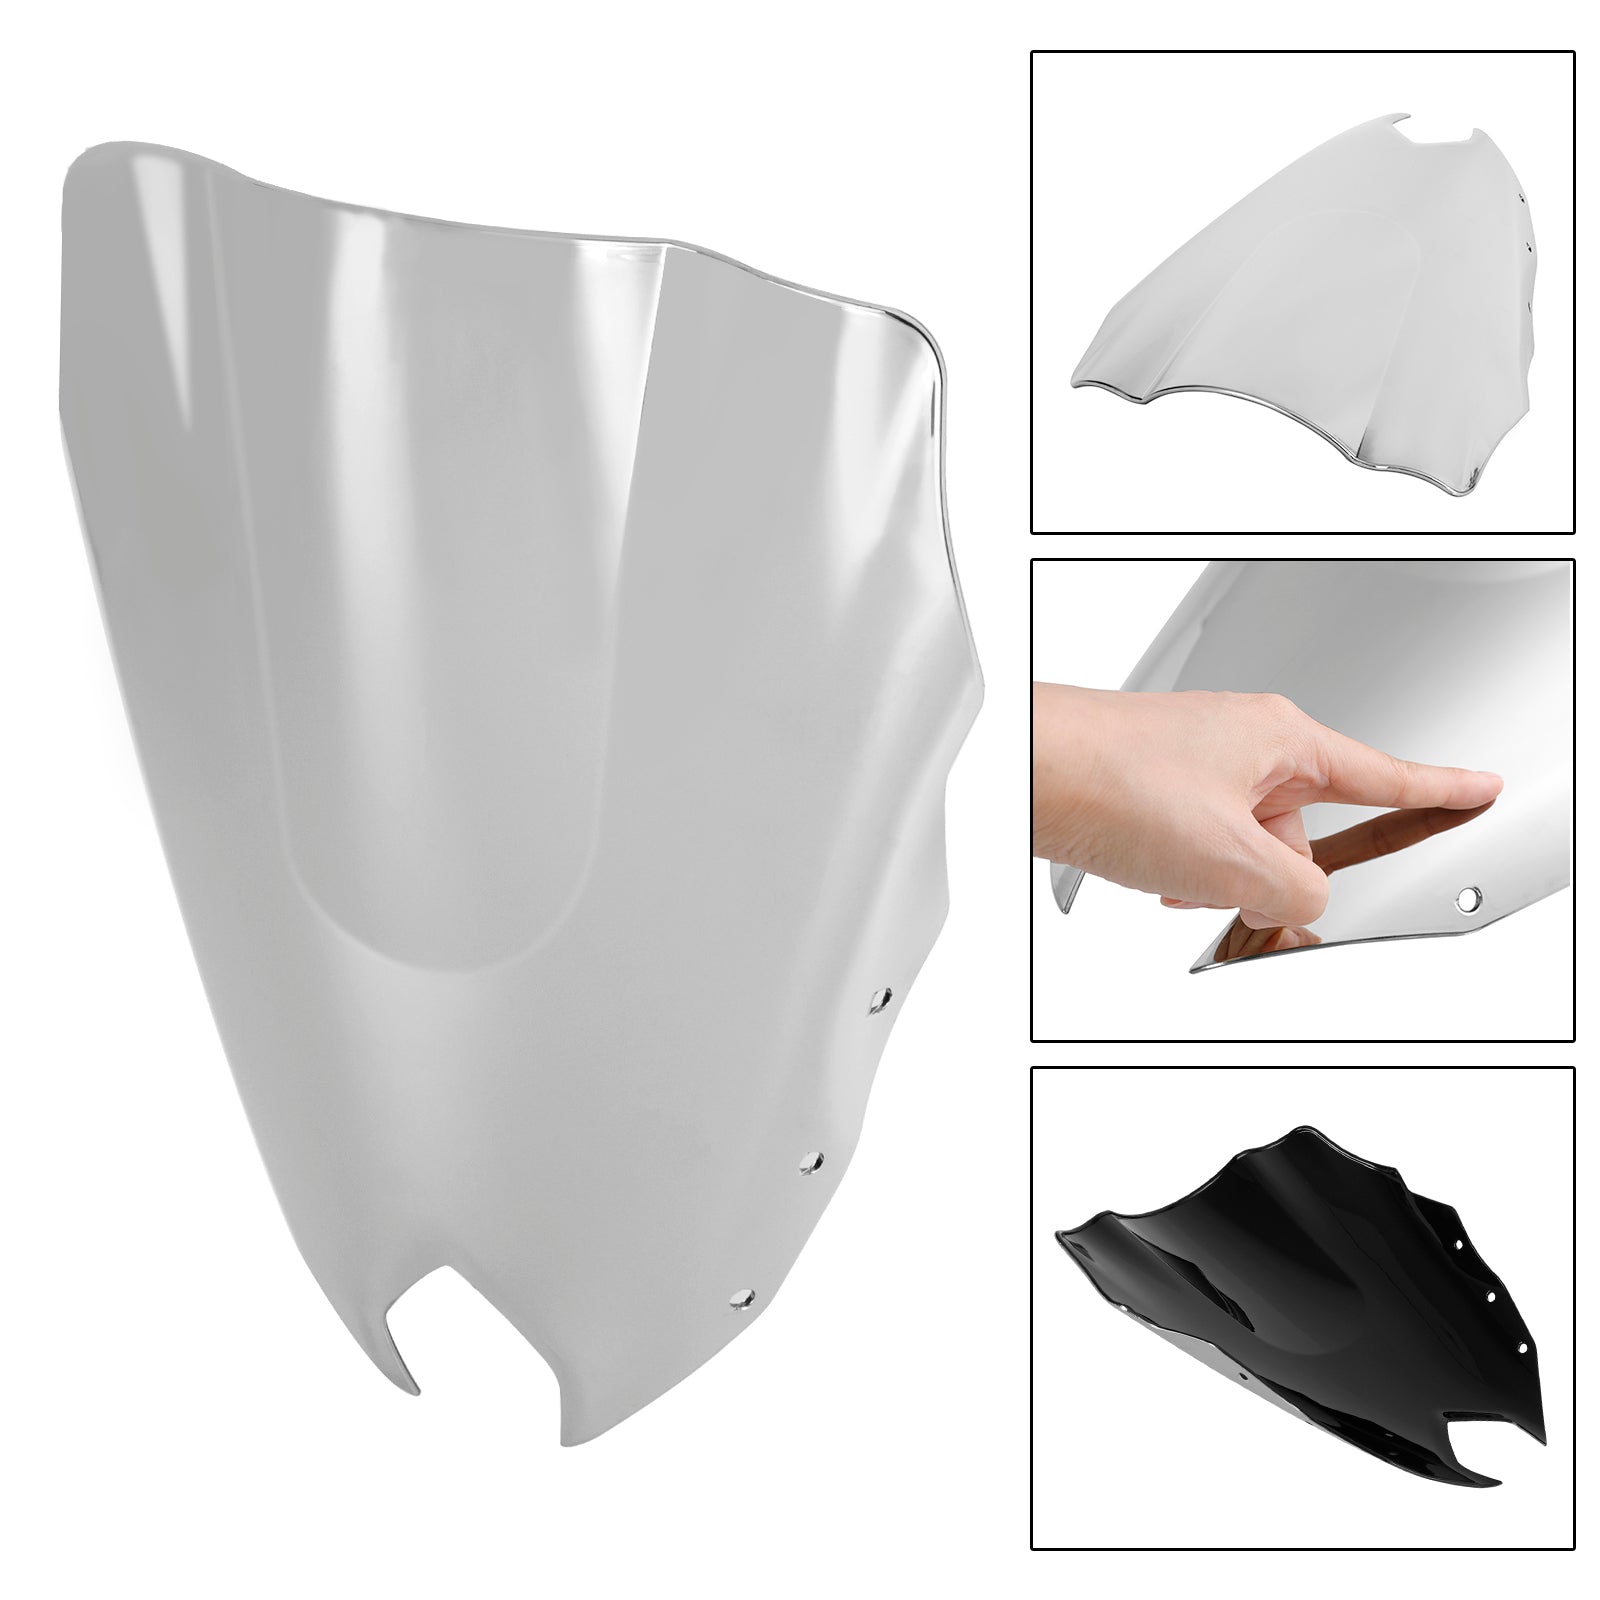 ABS Motorcycle Windshield WindScreen fit for Yamaha FZ6R FZ-6R FZS600 2009-2015